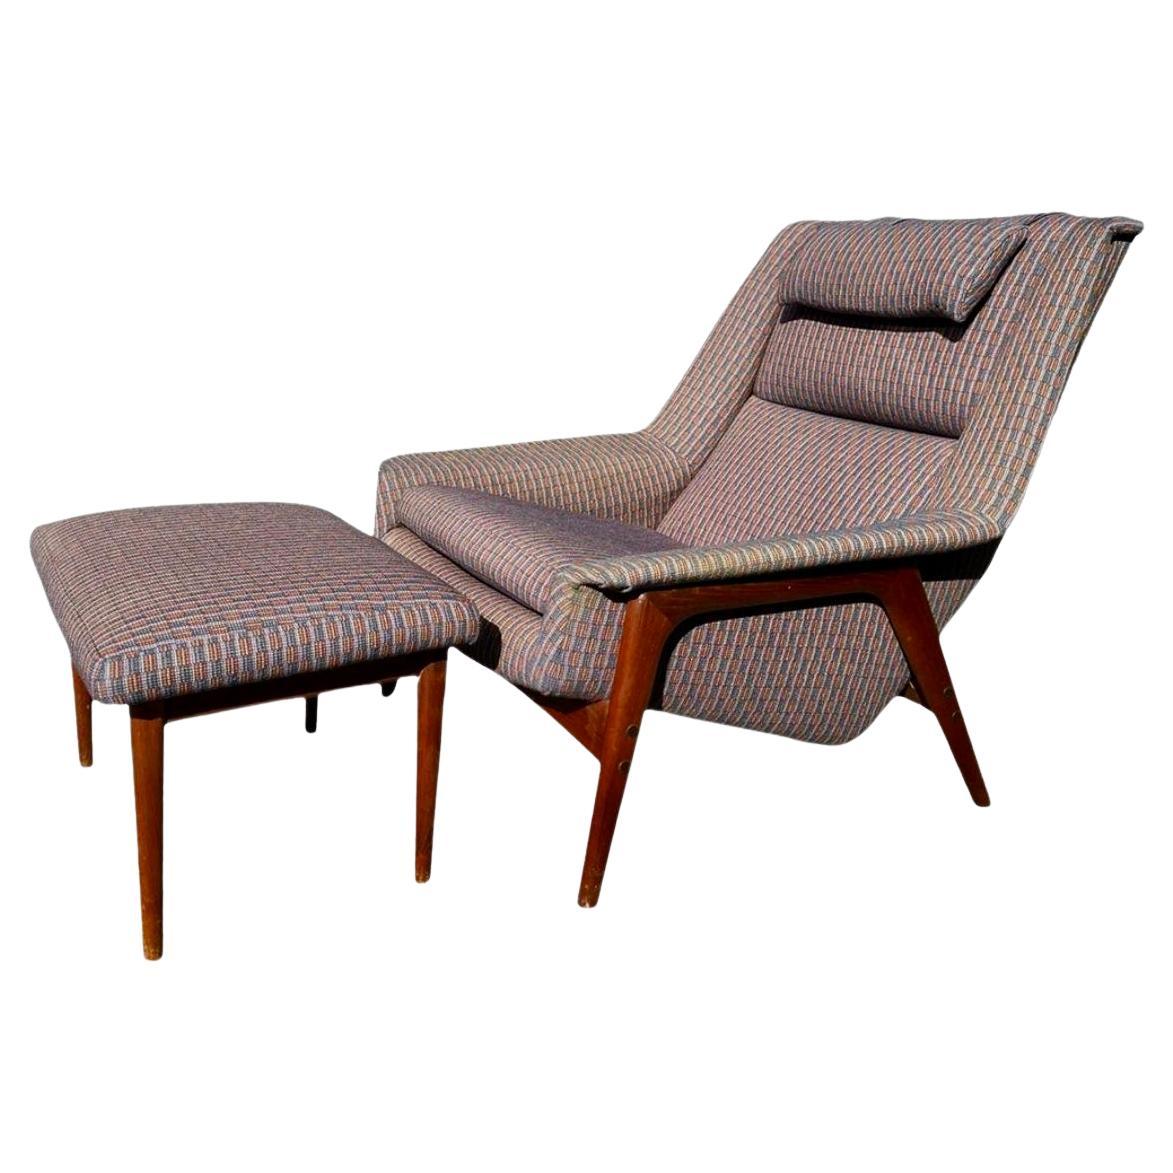 Folke Ohlsson For Dux ‘Profil’ Lounge Chair and Ottoman For Sale